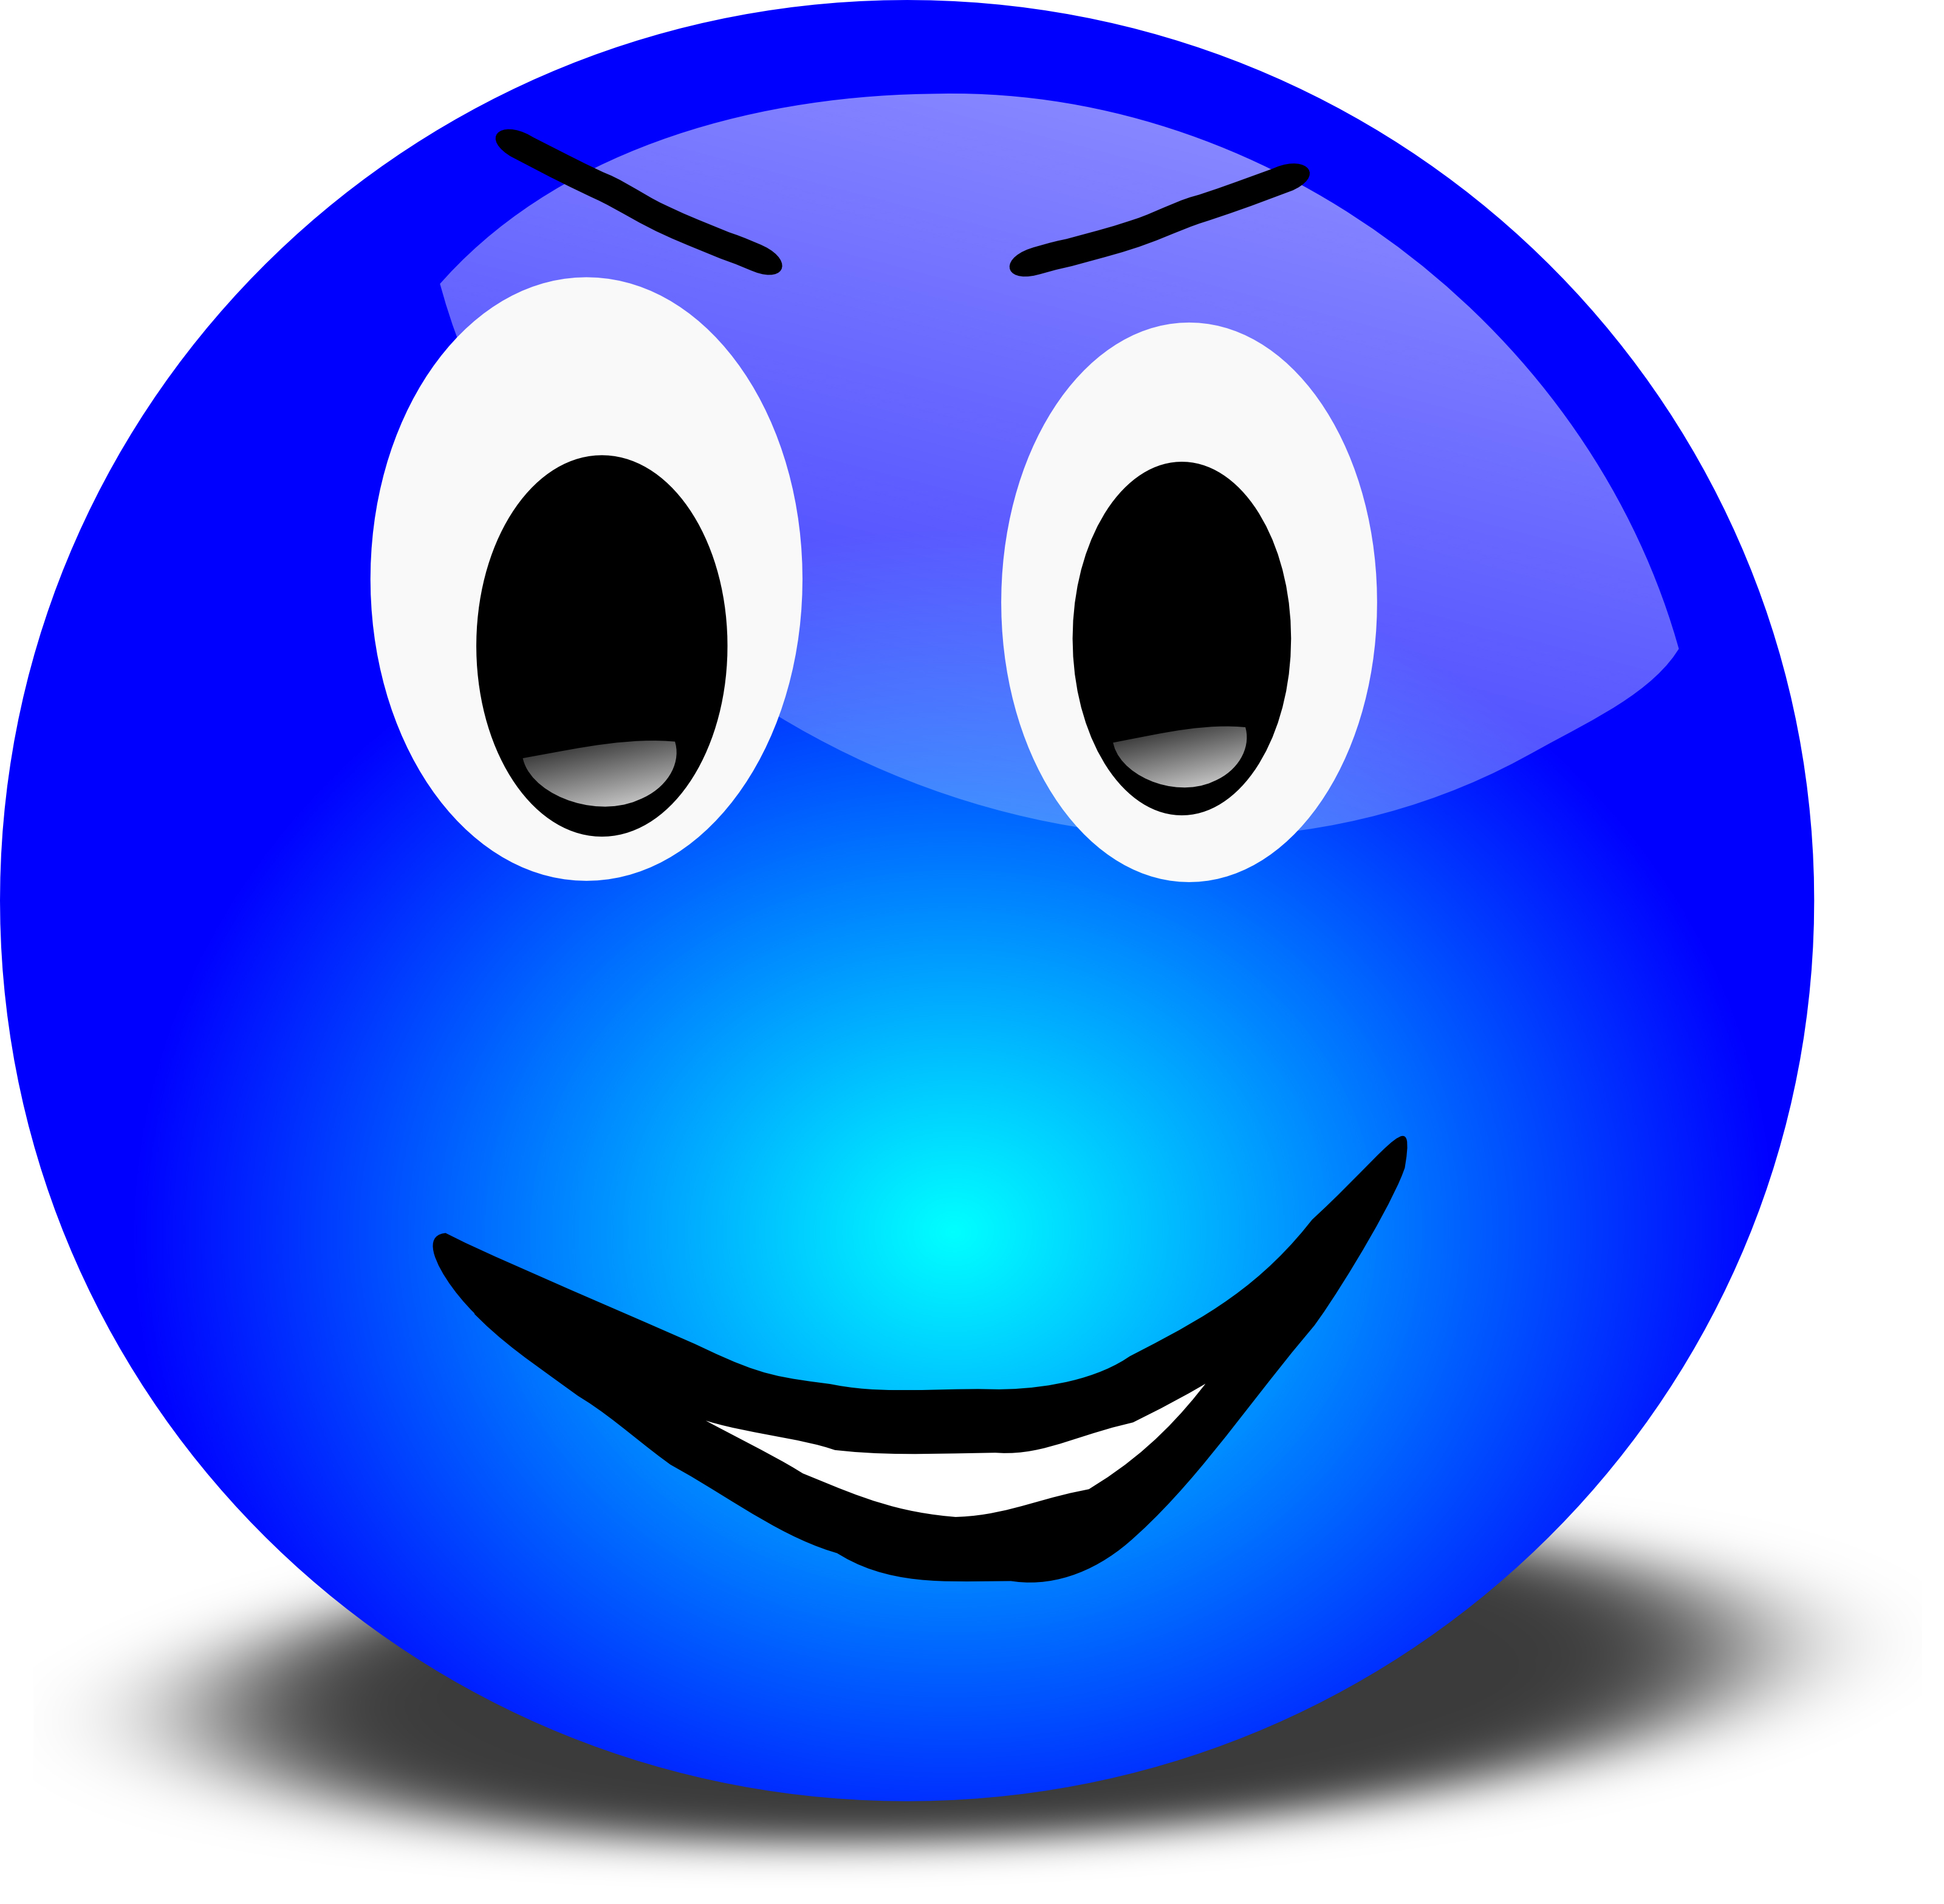 Smiling Cartoon Faces In Hd. - Clipart library